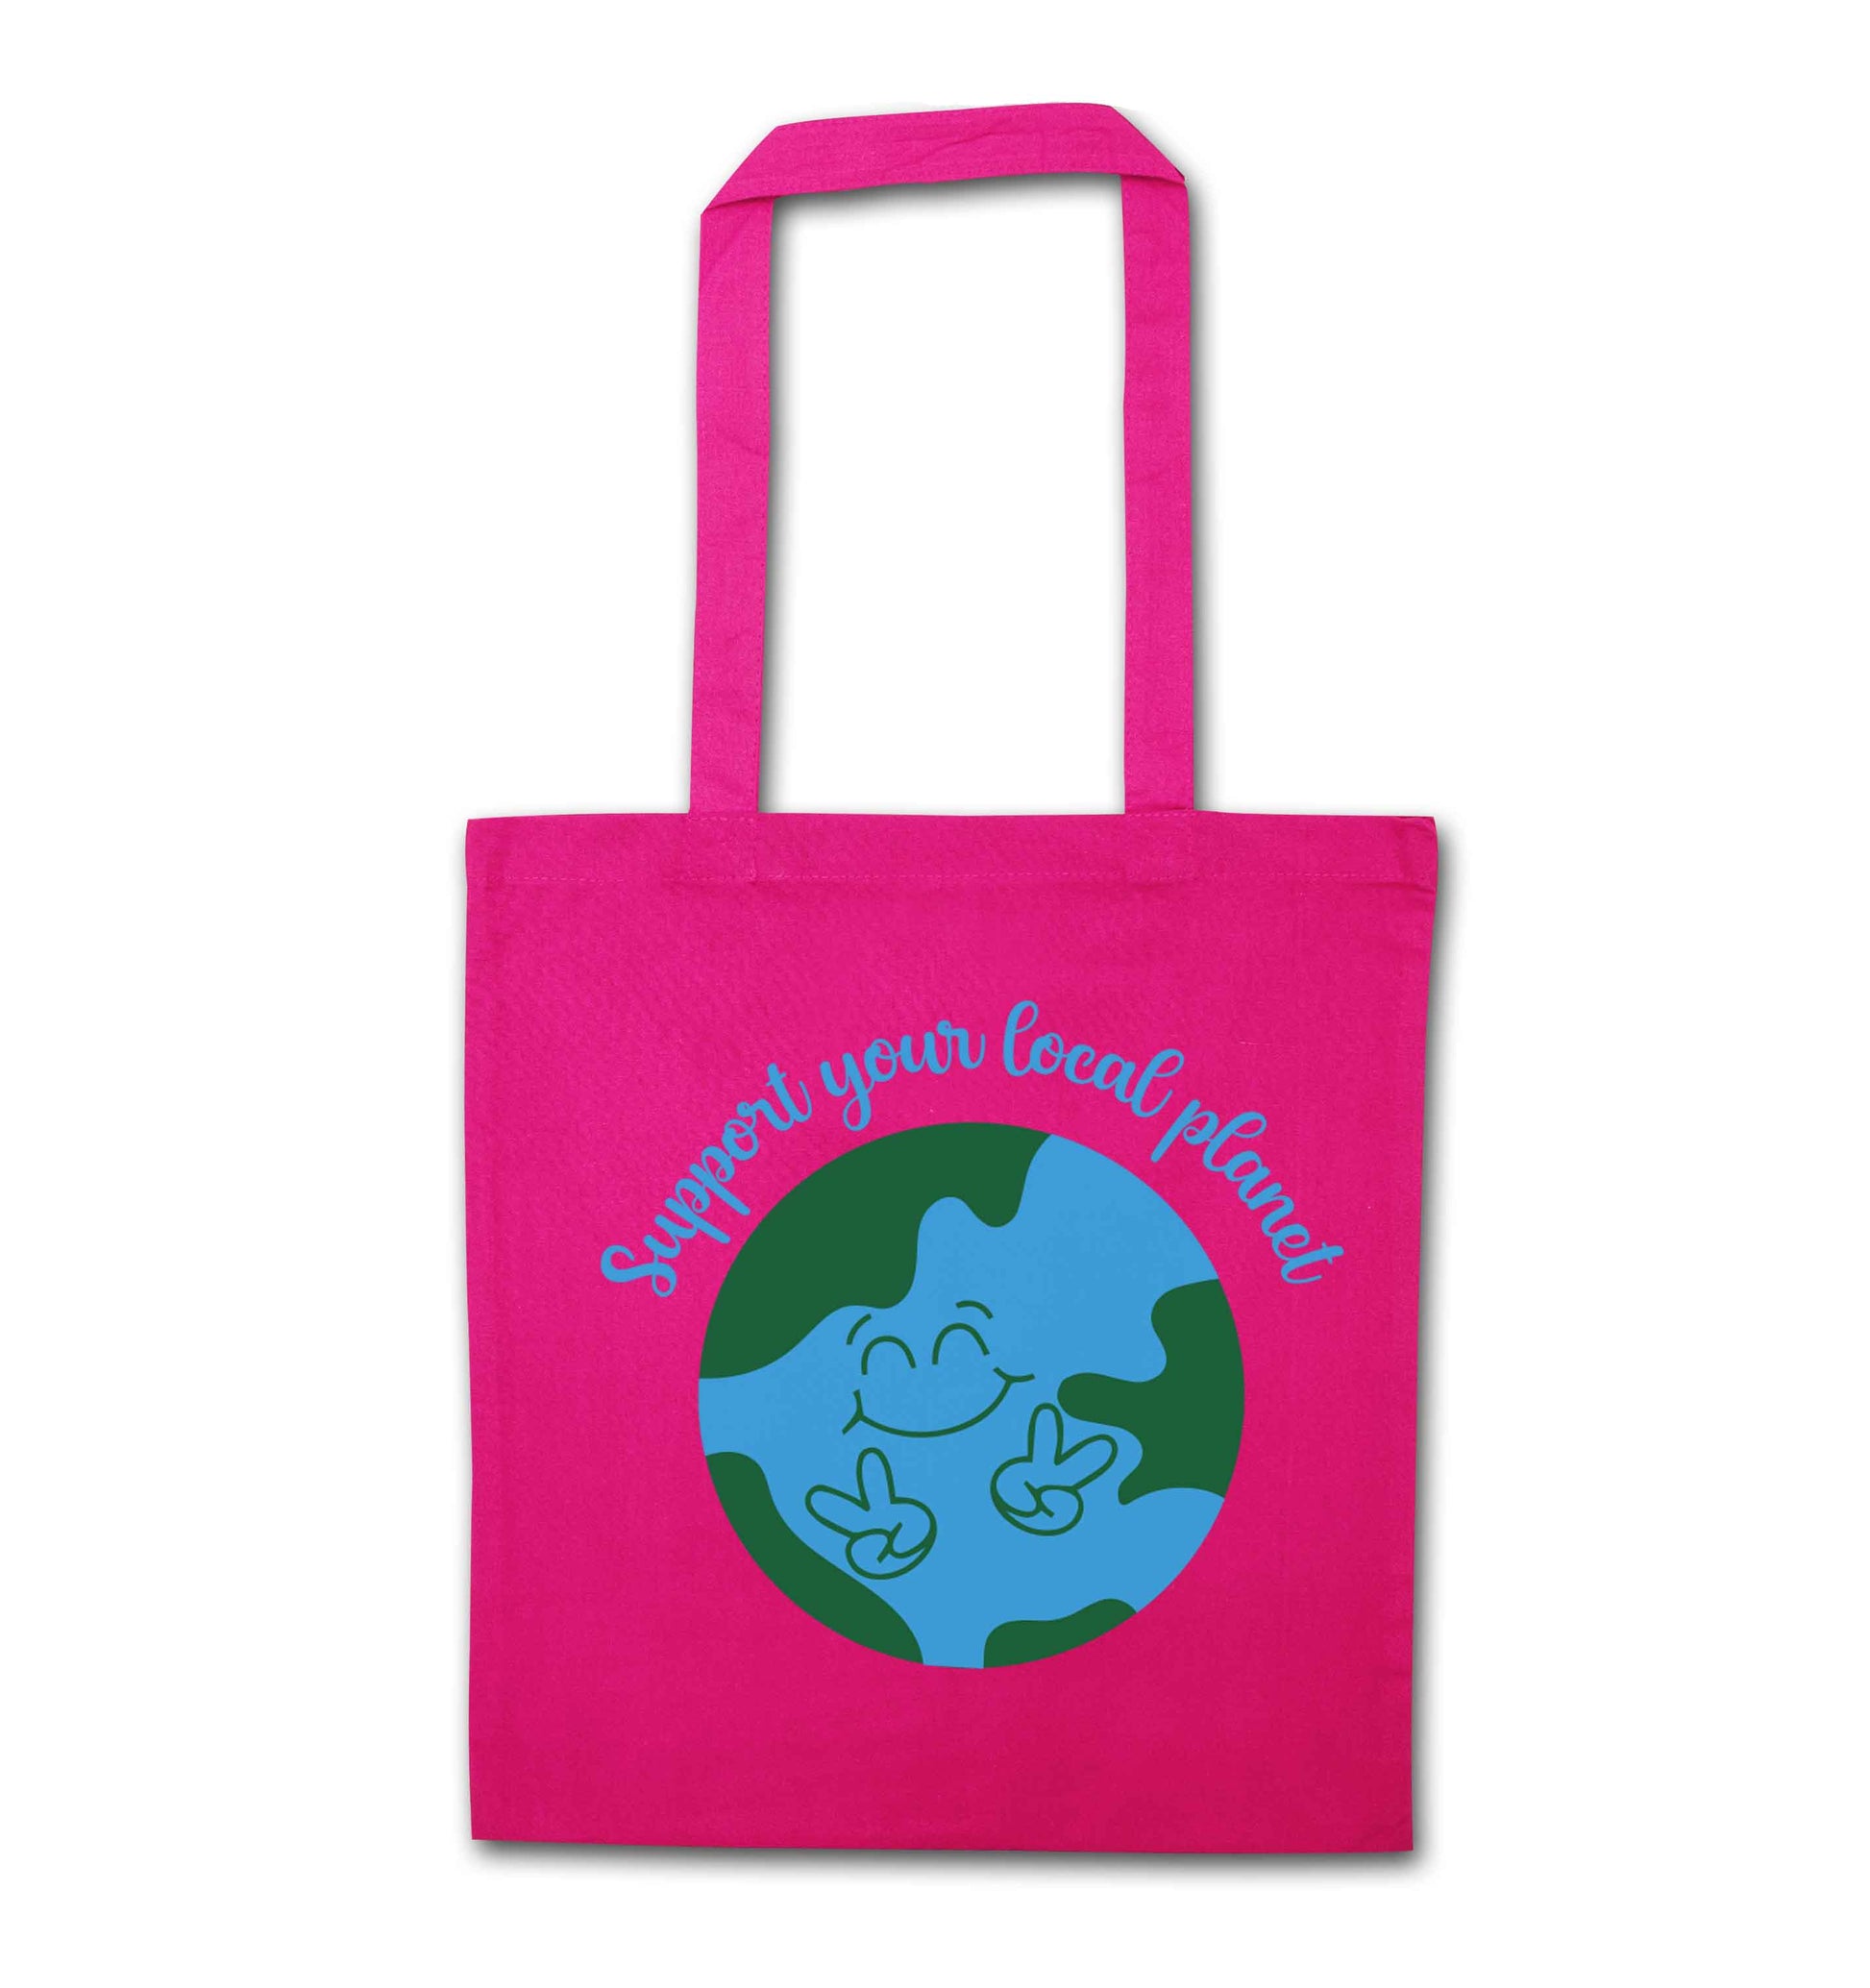 Support your local planet pink tote bag